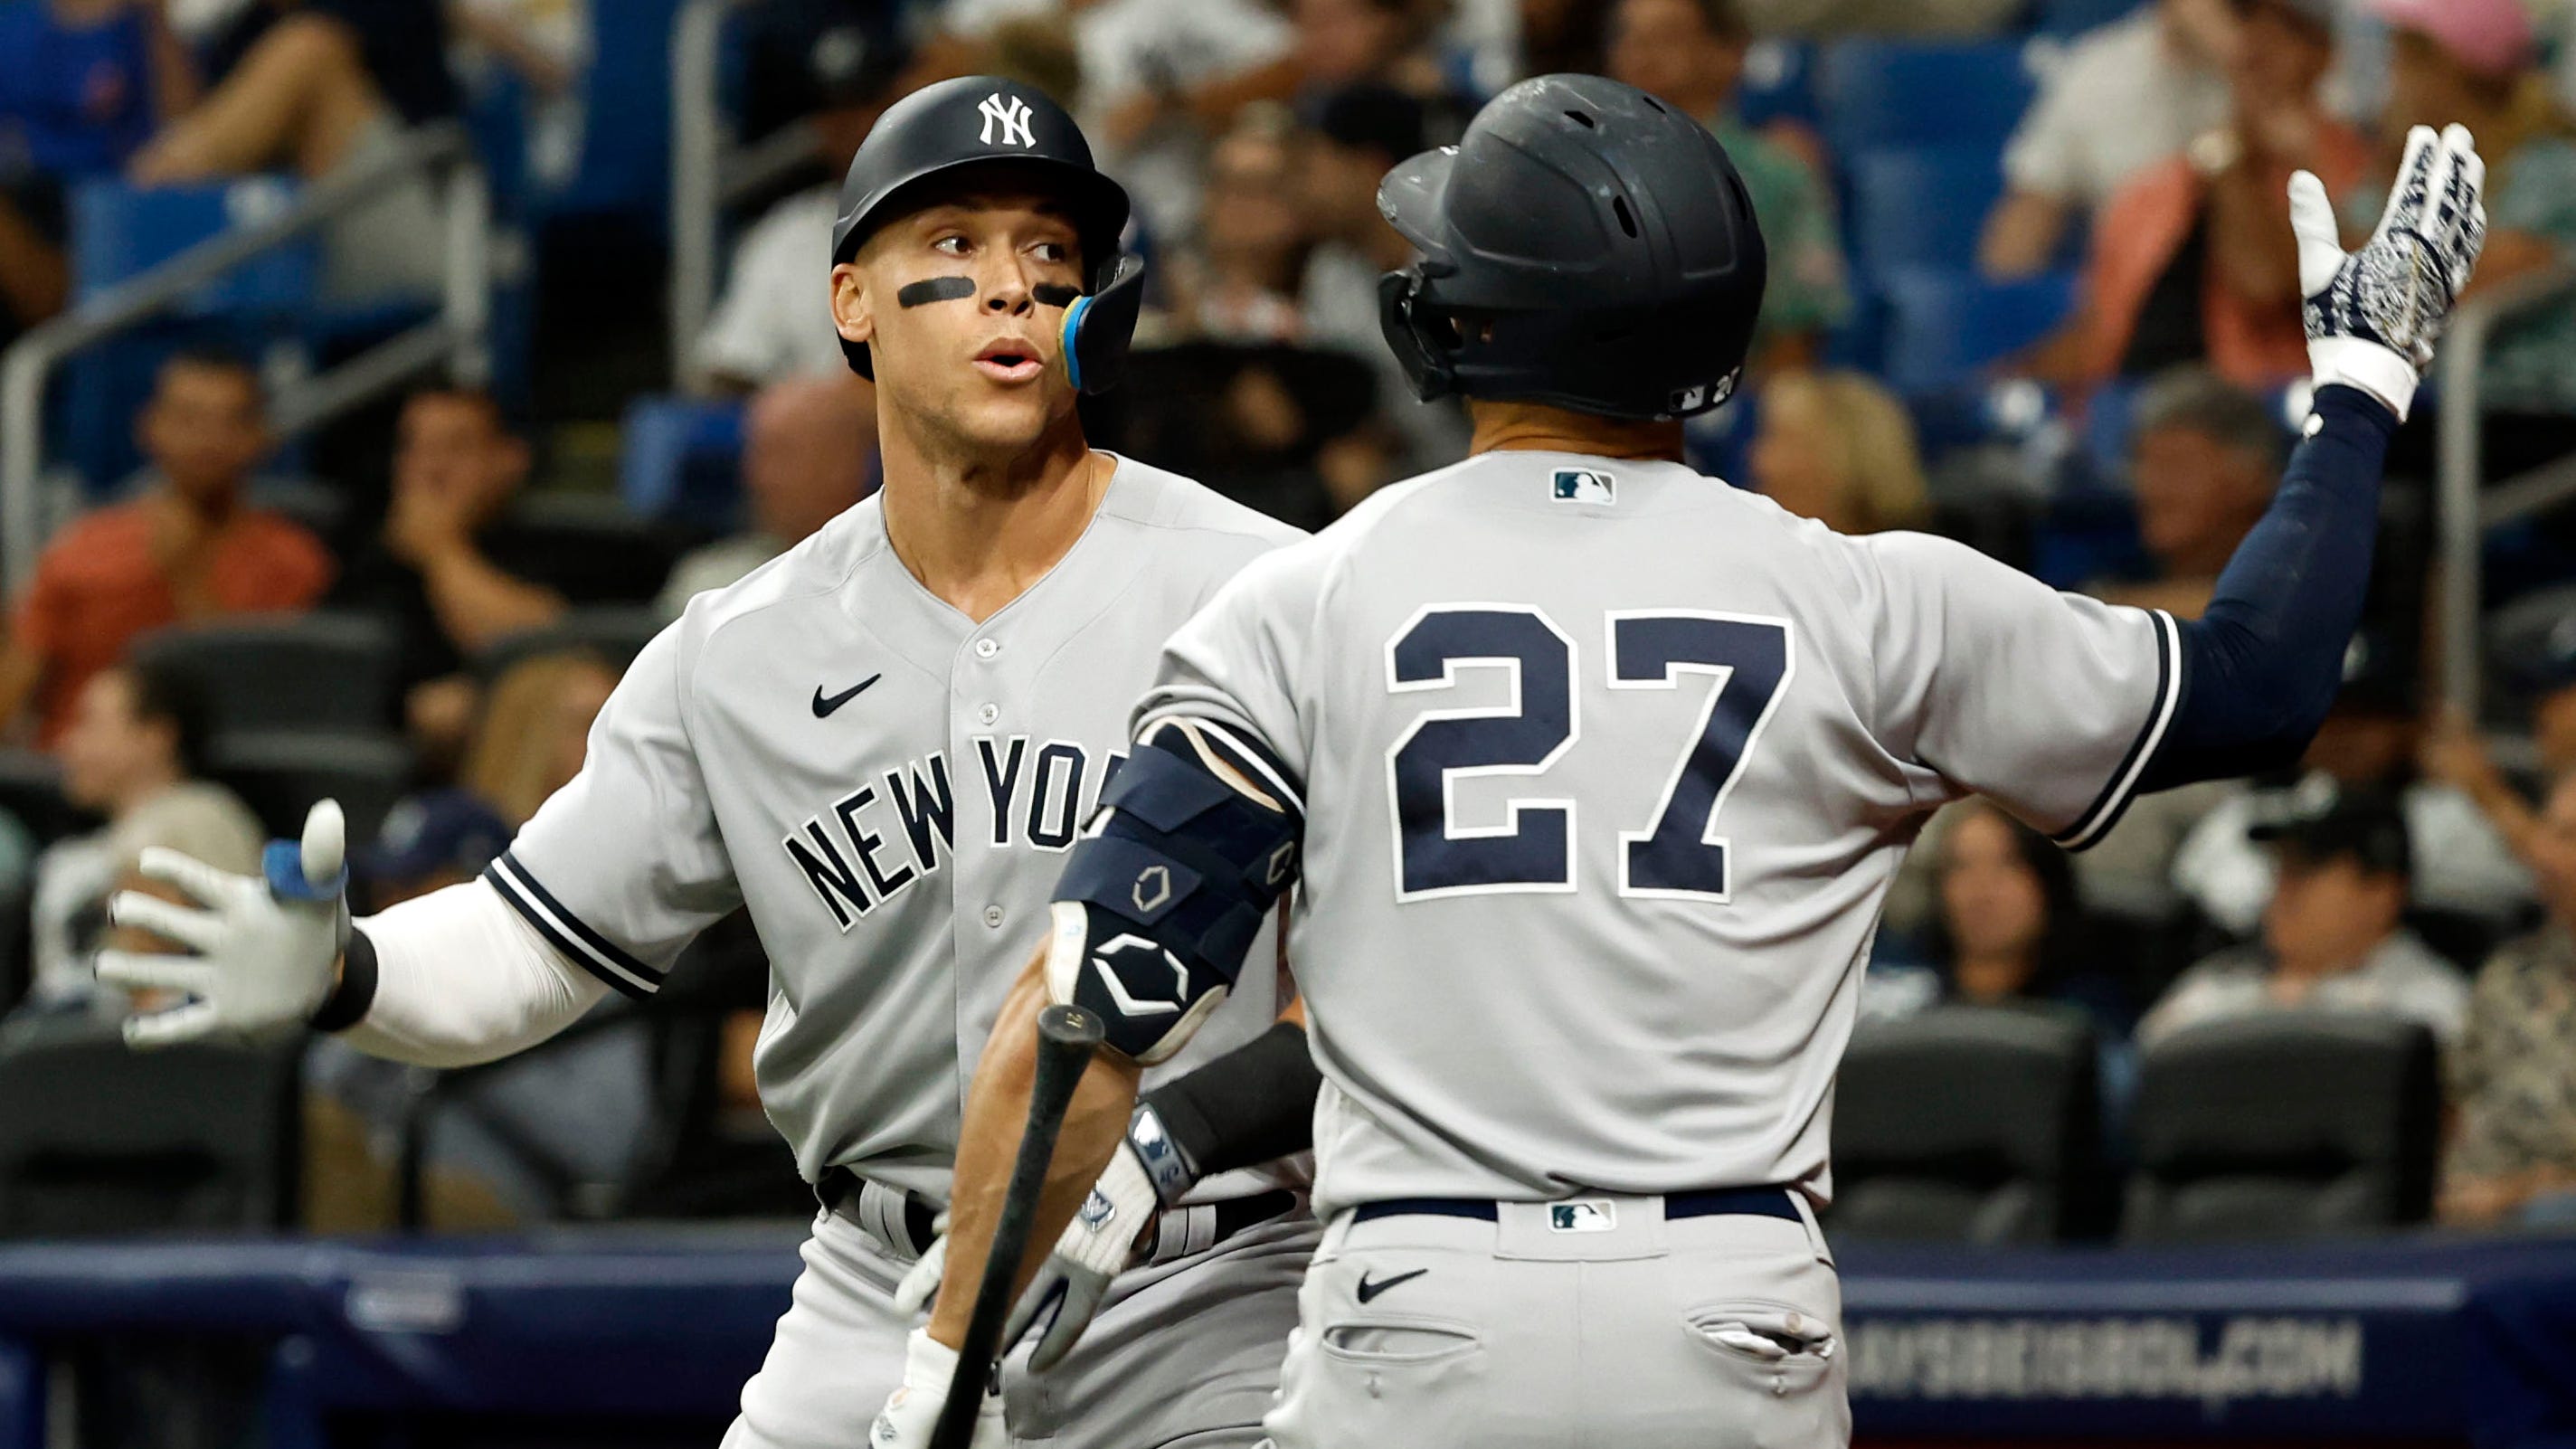 Column: Aaron Judge's record home run pace for Yankees could surpass Roger Maris